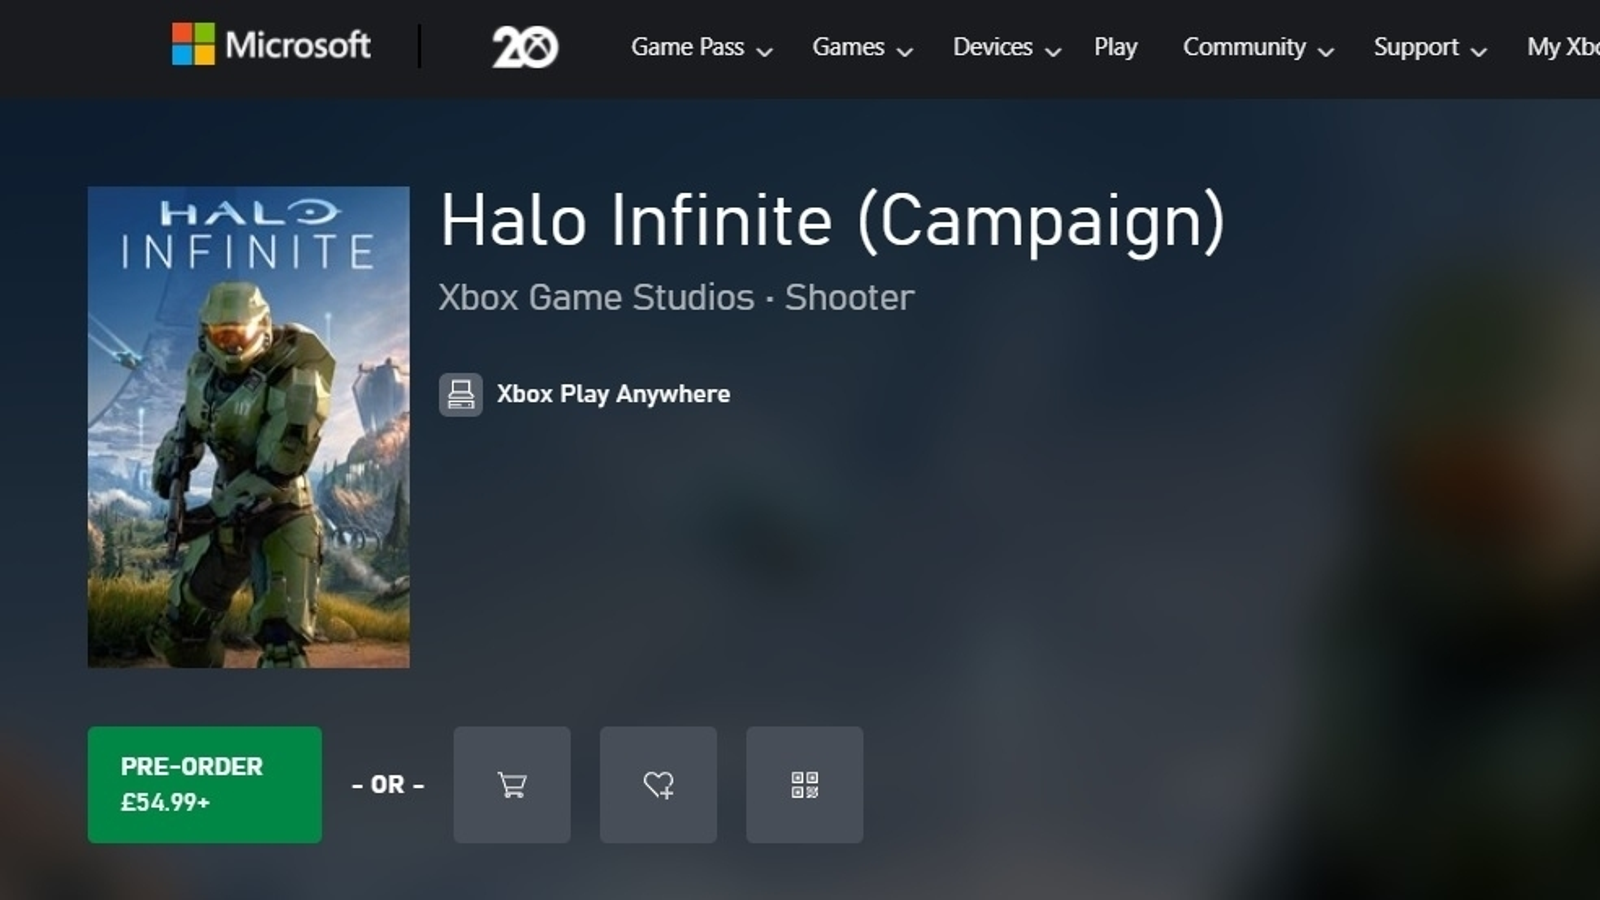 The Game Awards' Twitter Thinks Halo Was Paramount's No.1 Show